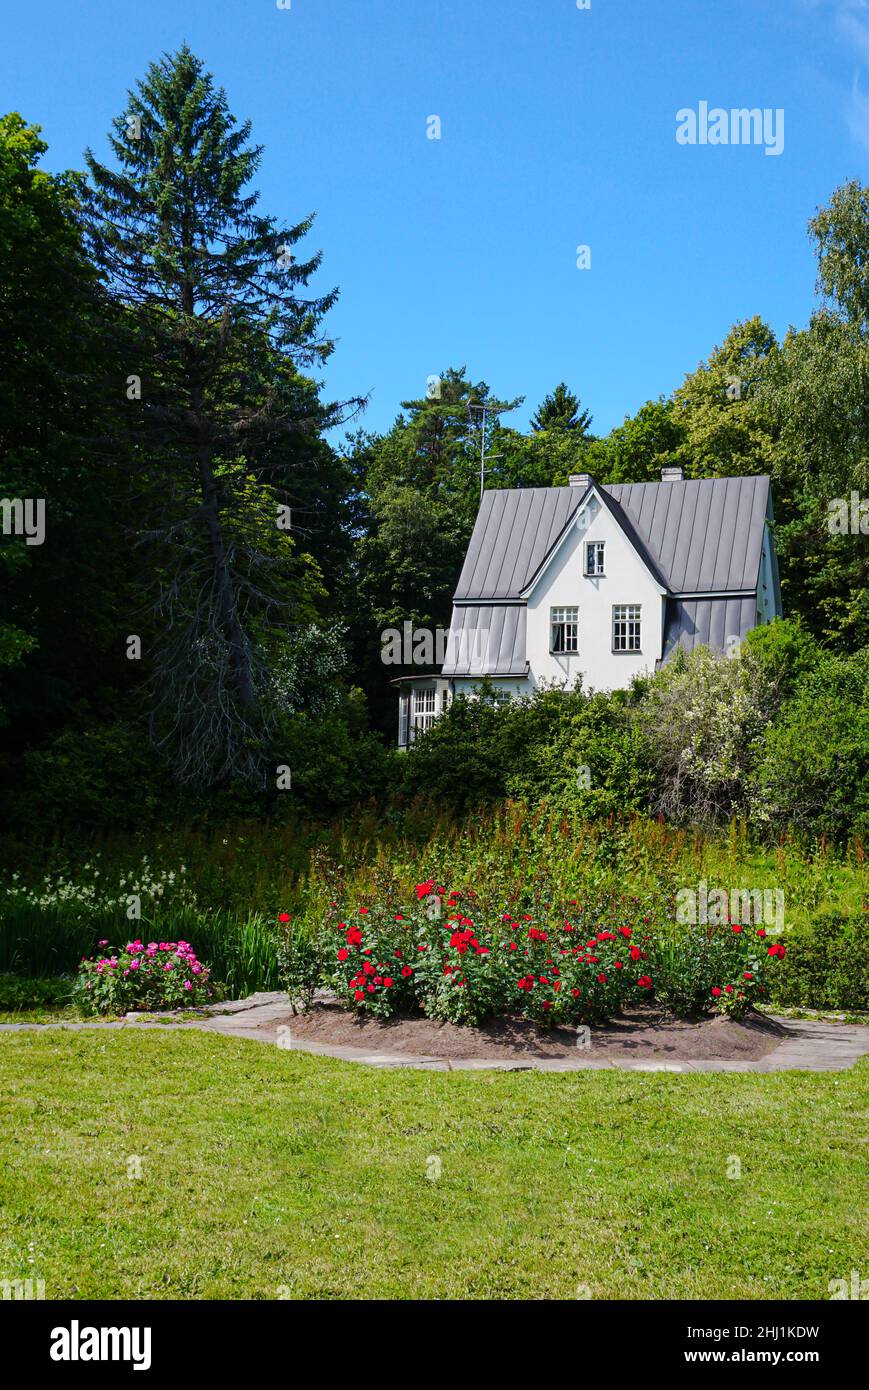 The perfect country house surrounded by dense trees and flower bushes Stock Photo